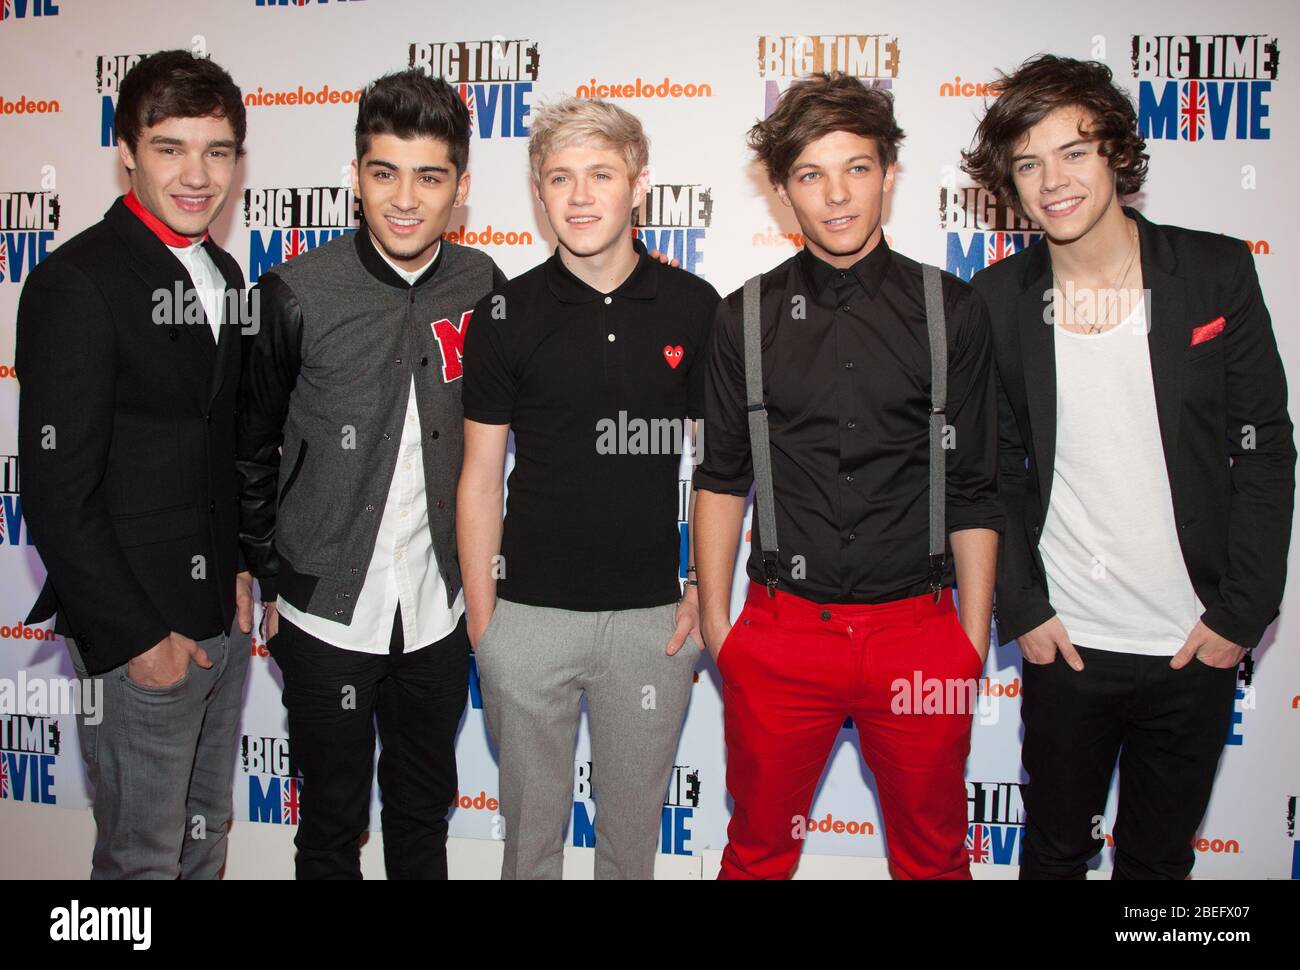 L-R) Liam Payne, Zayn Malik, Niall Horan, Louis Tomlinson, and Harry Styles  of One Direction attend the "Big Time Movie" New York premiere at 583 Park  Stock Photo - Alamy